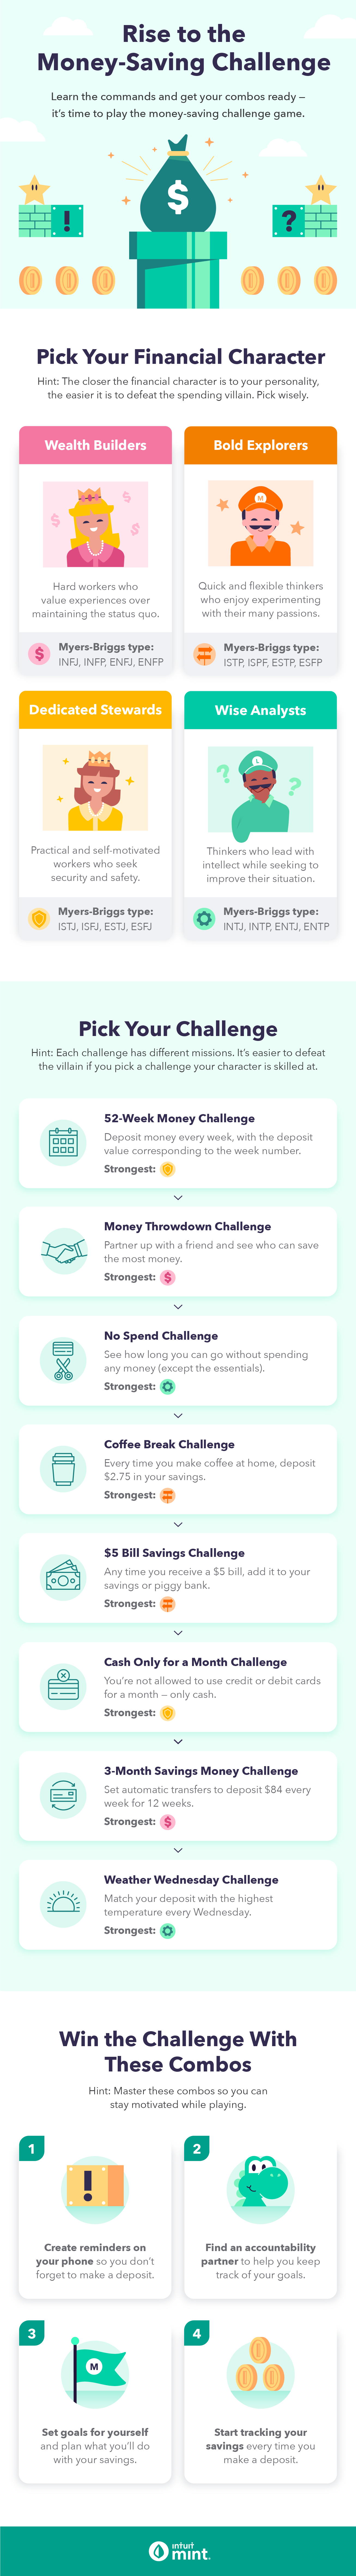 An infographic overviews what is a money-saving challenge, plus types of money-saving challenges to choose from depending on your personality type.